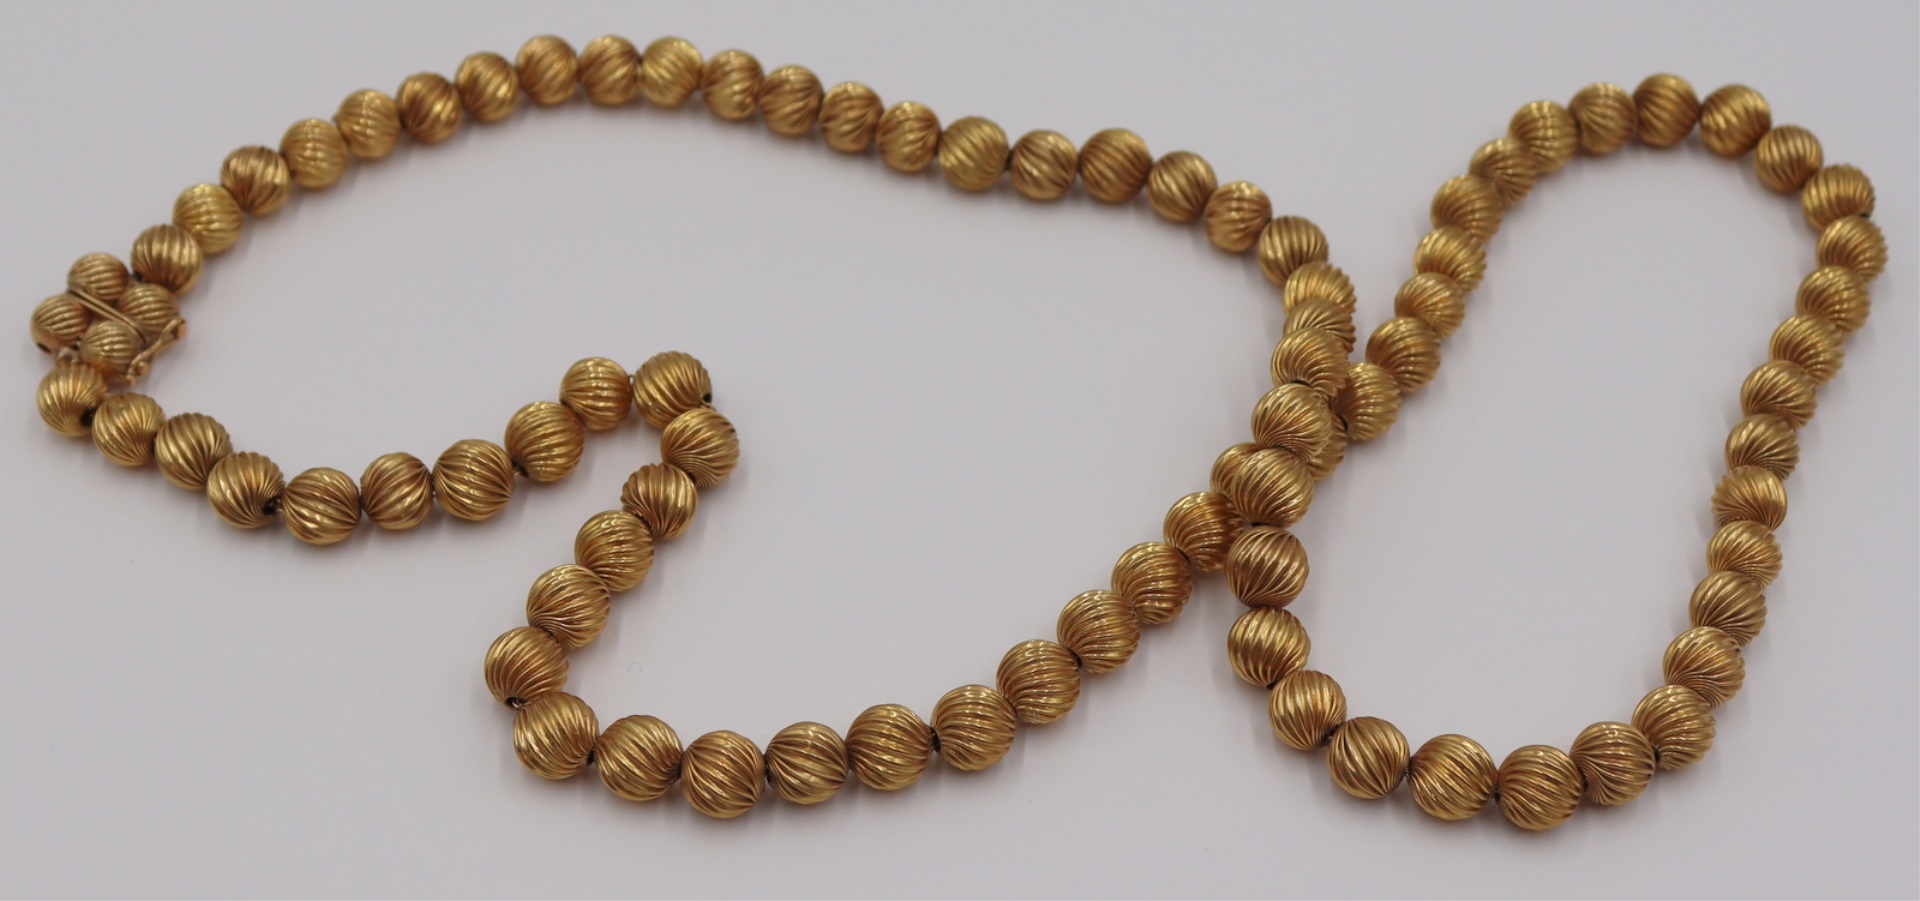 JEWELRY 14KT GOLD RIBBED BEADED 3bcfc4